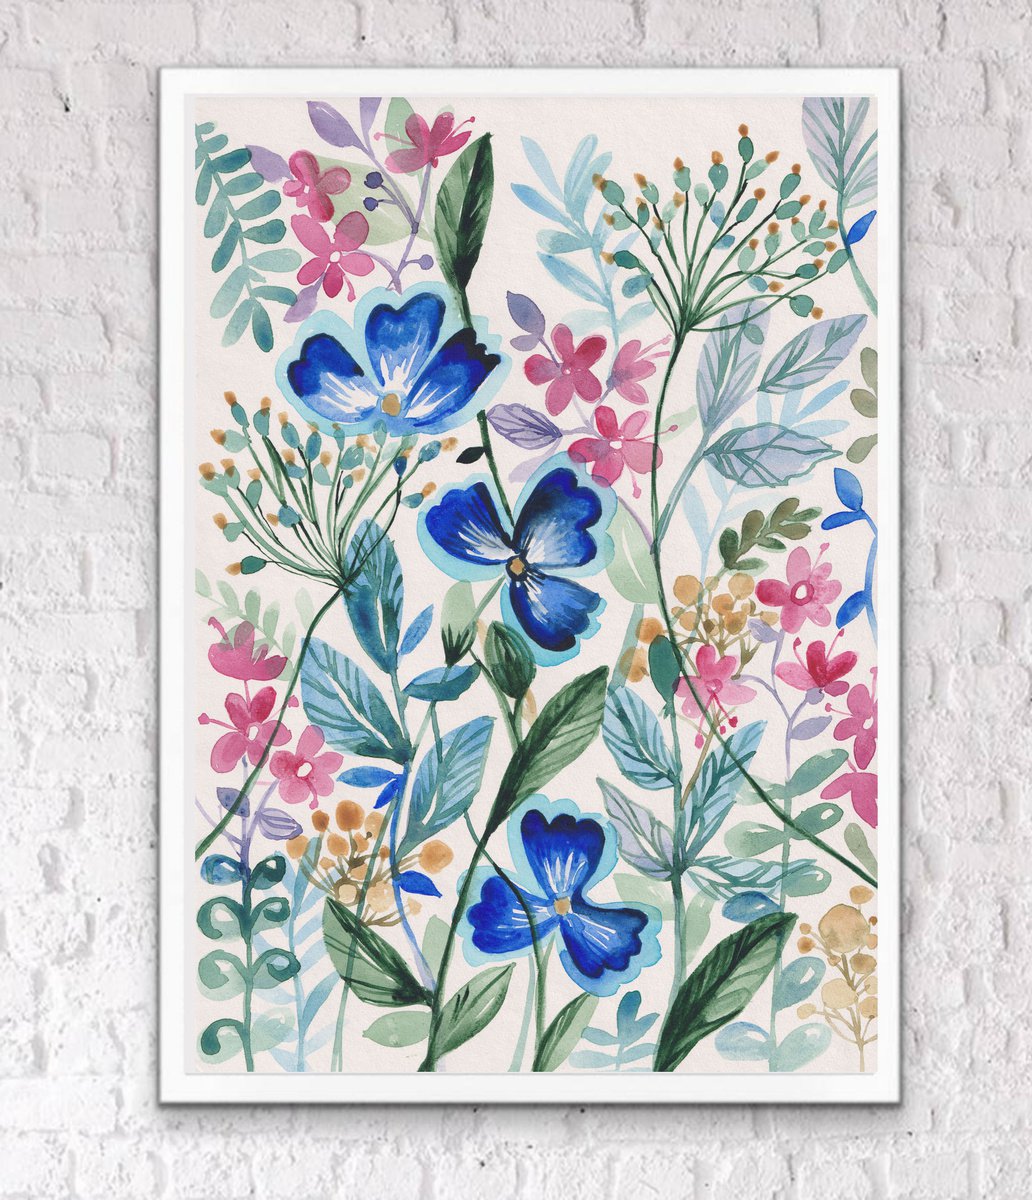 Cute flowers meadow Paintings, watercolor painting on paper, wall art, interior art, in... by Alexandra Dobreikin